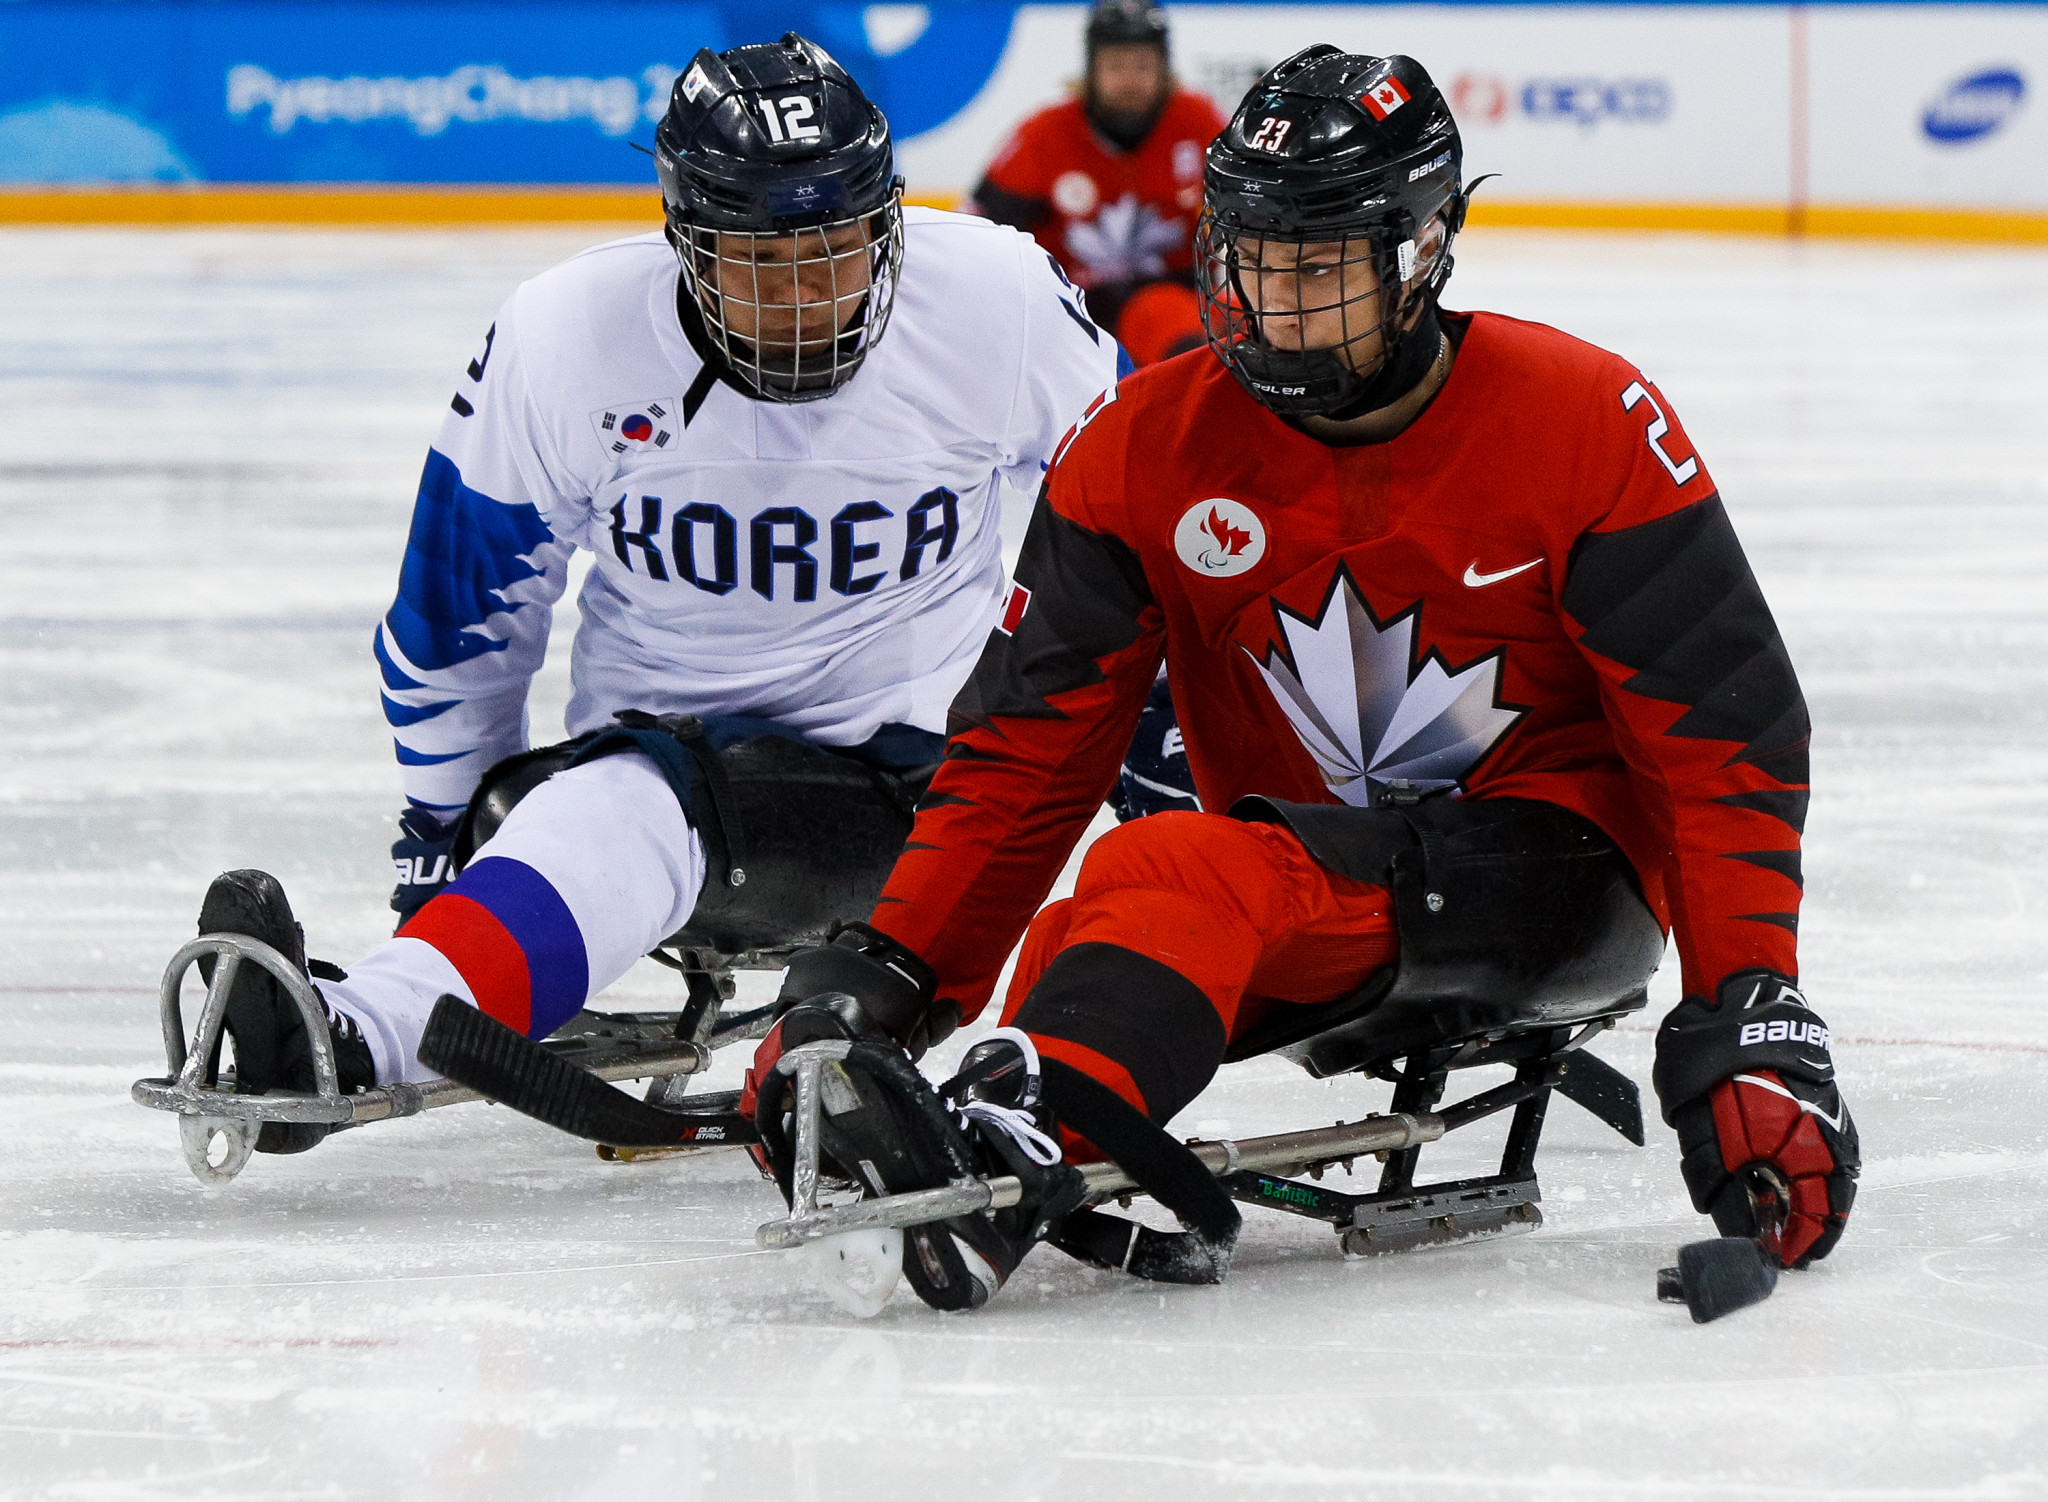 Two-sport Para-athlete Hickey to focus on ice hockey in quest for Beijing 2022 gold